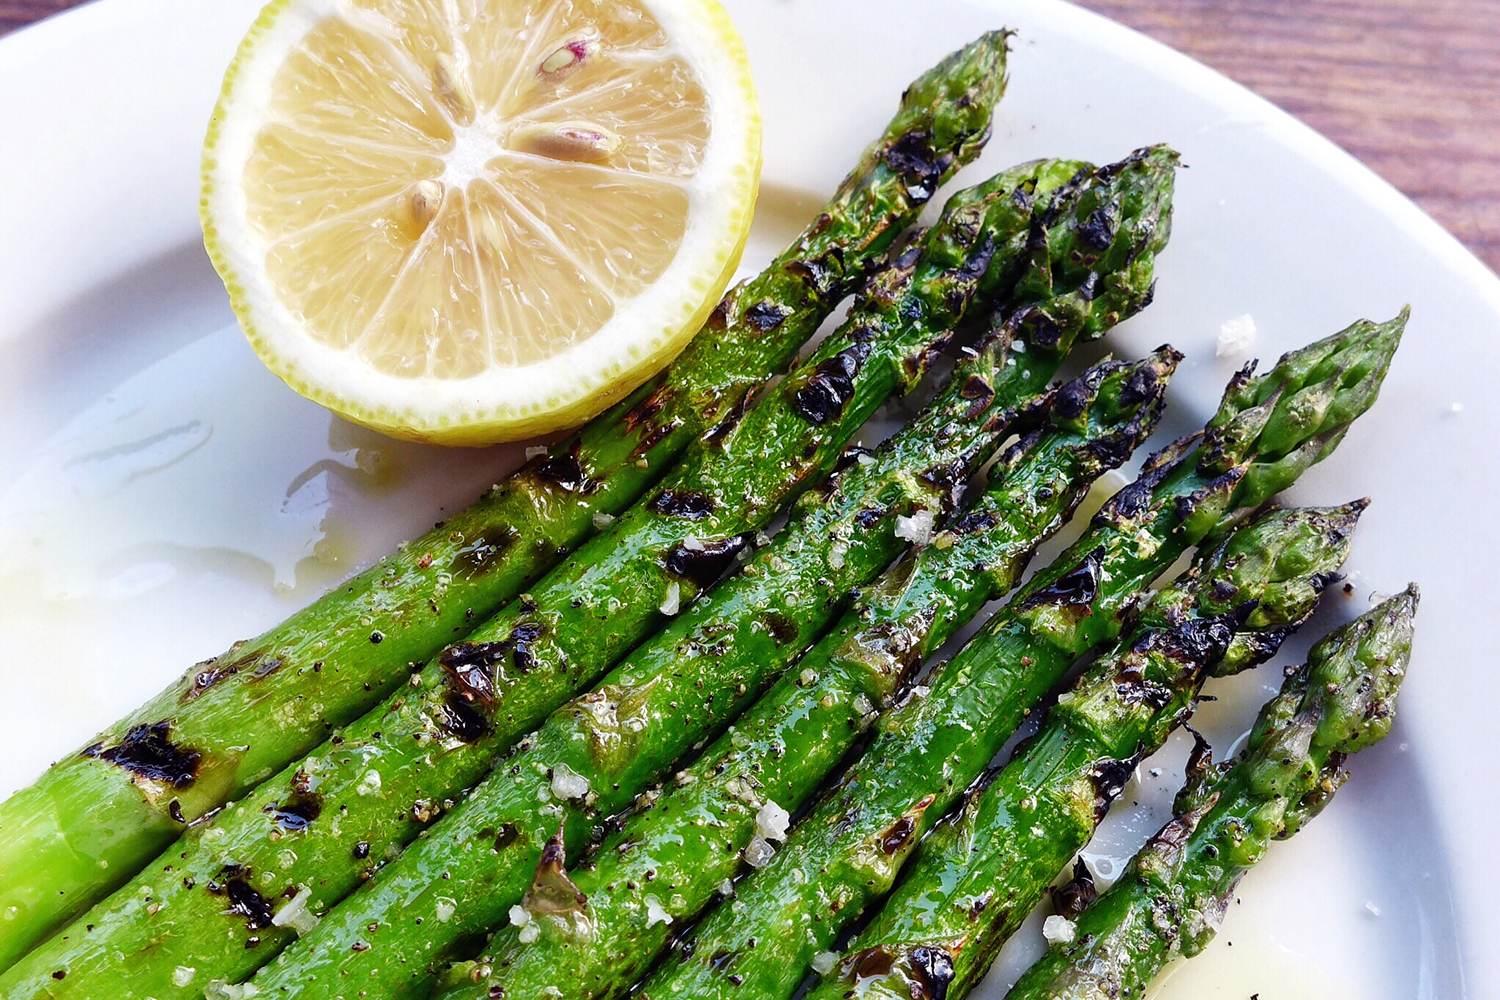 The Grilled Asparagus